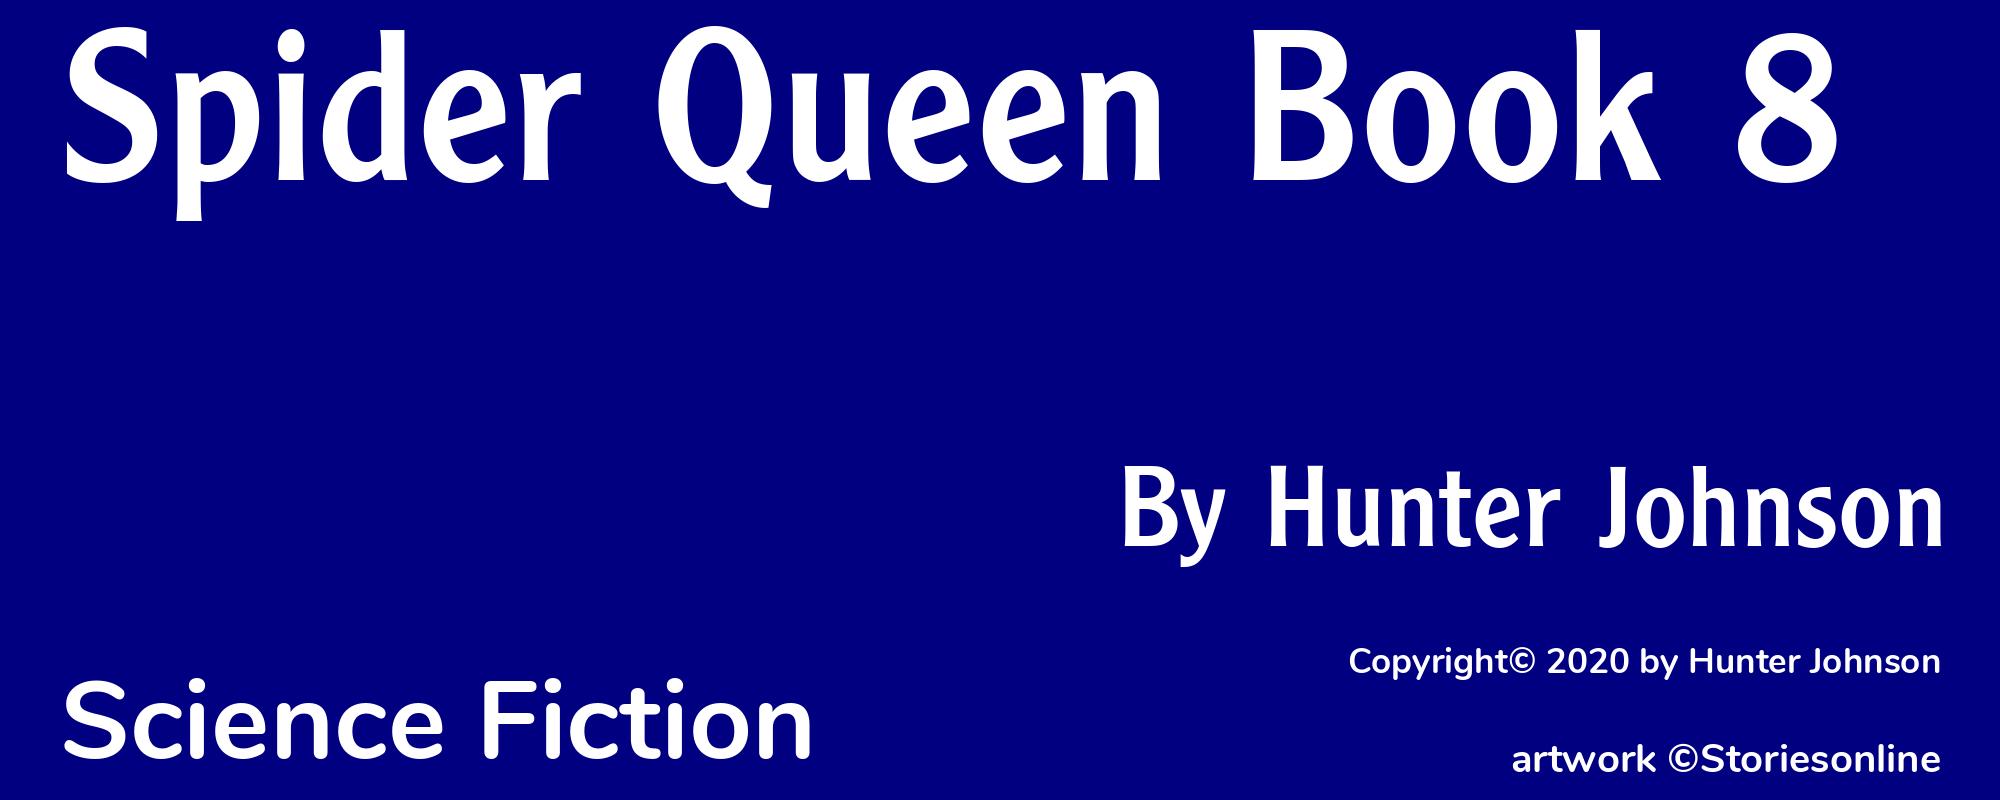 Spider Queen Book 8 - Cover